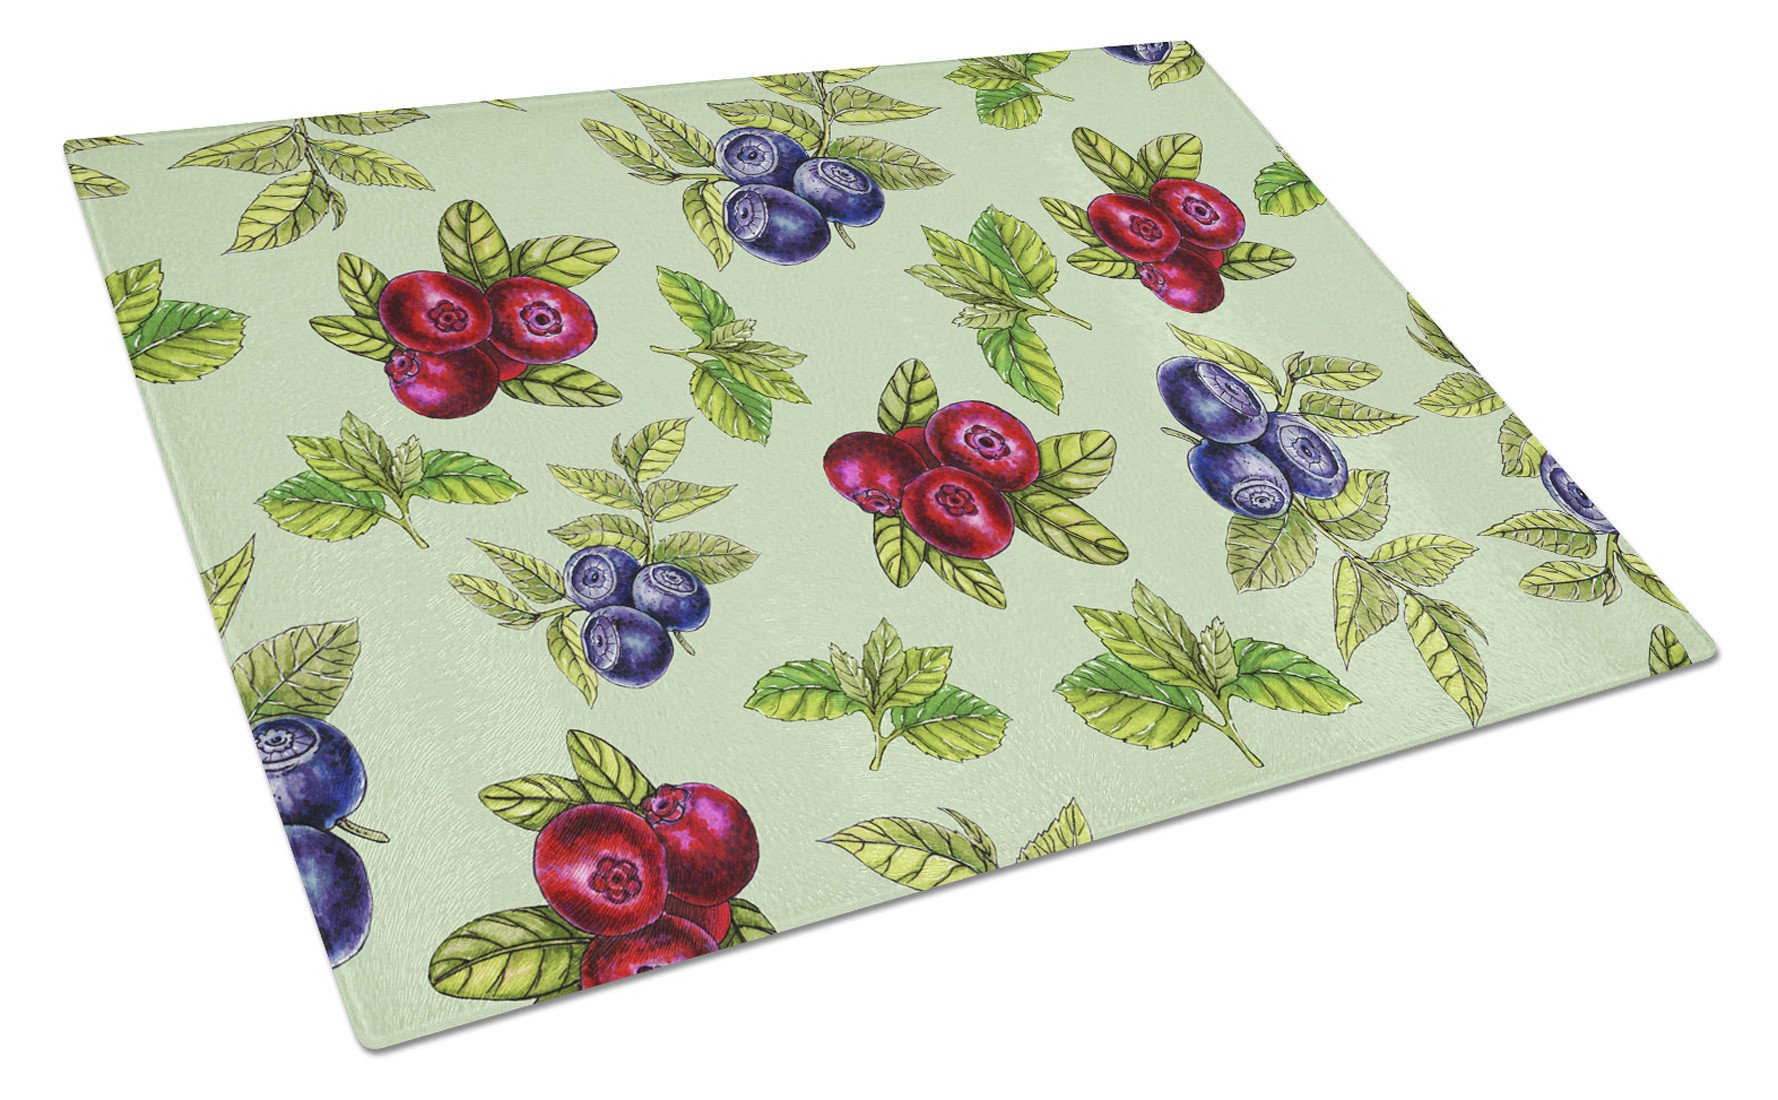 Berries in Green Glass Cutting Board Large BB5208LCB by Caroline's Treasures